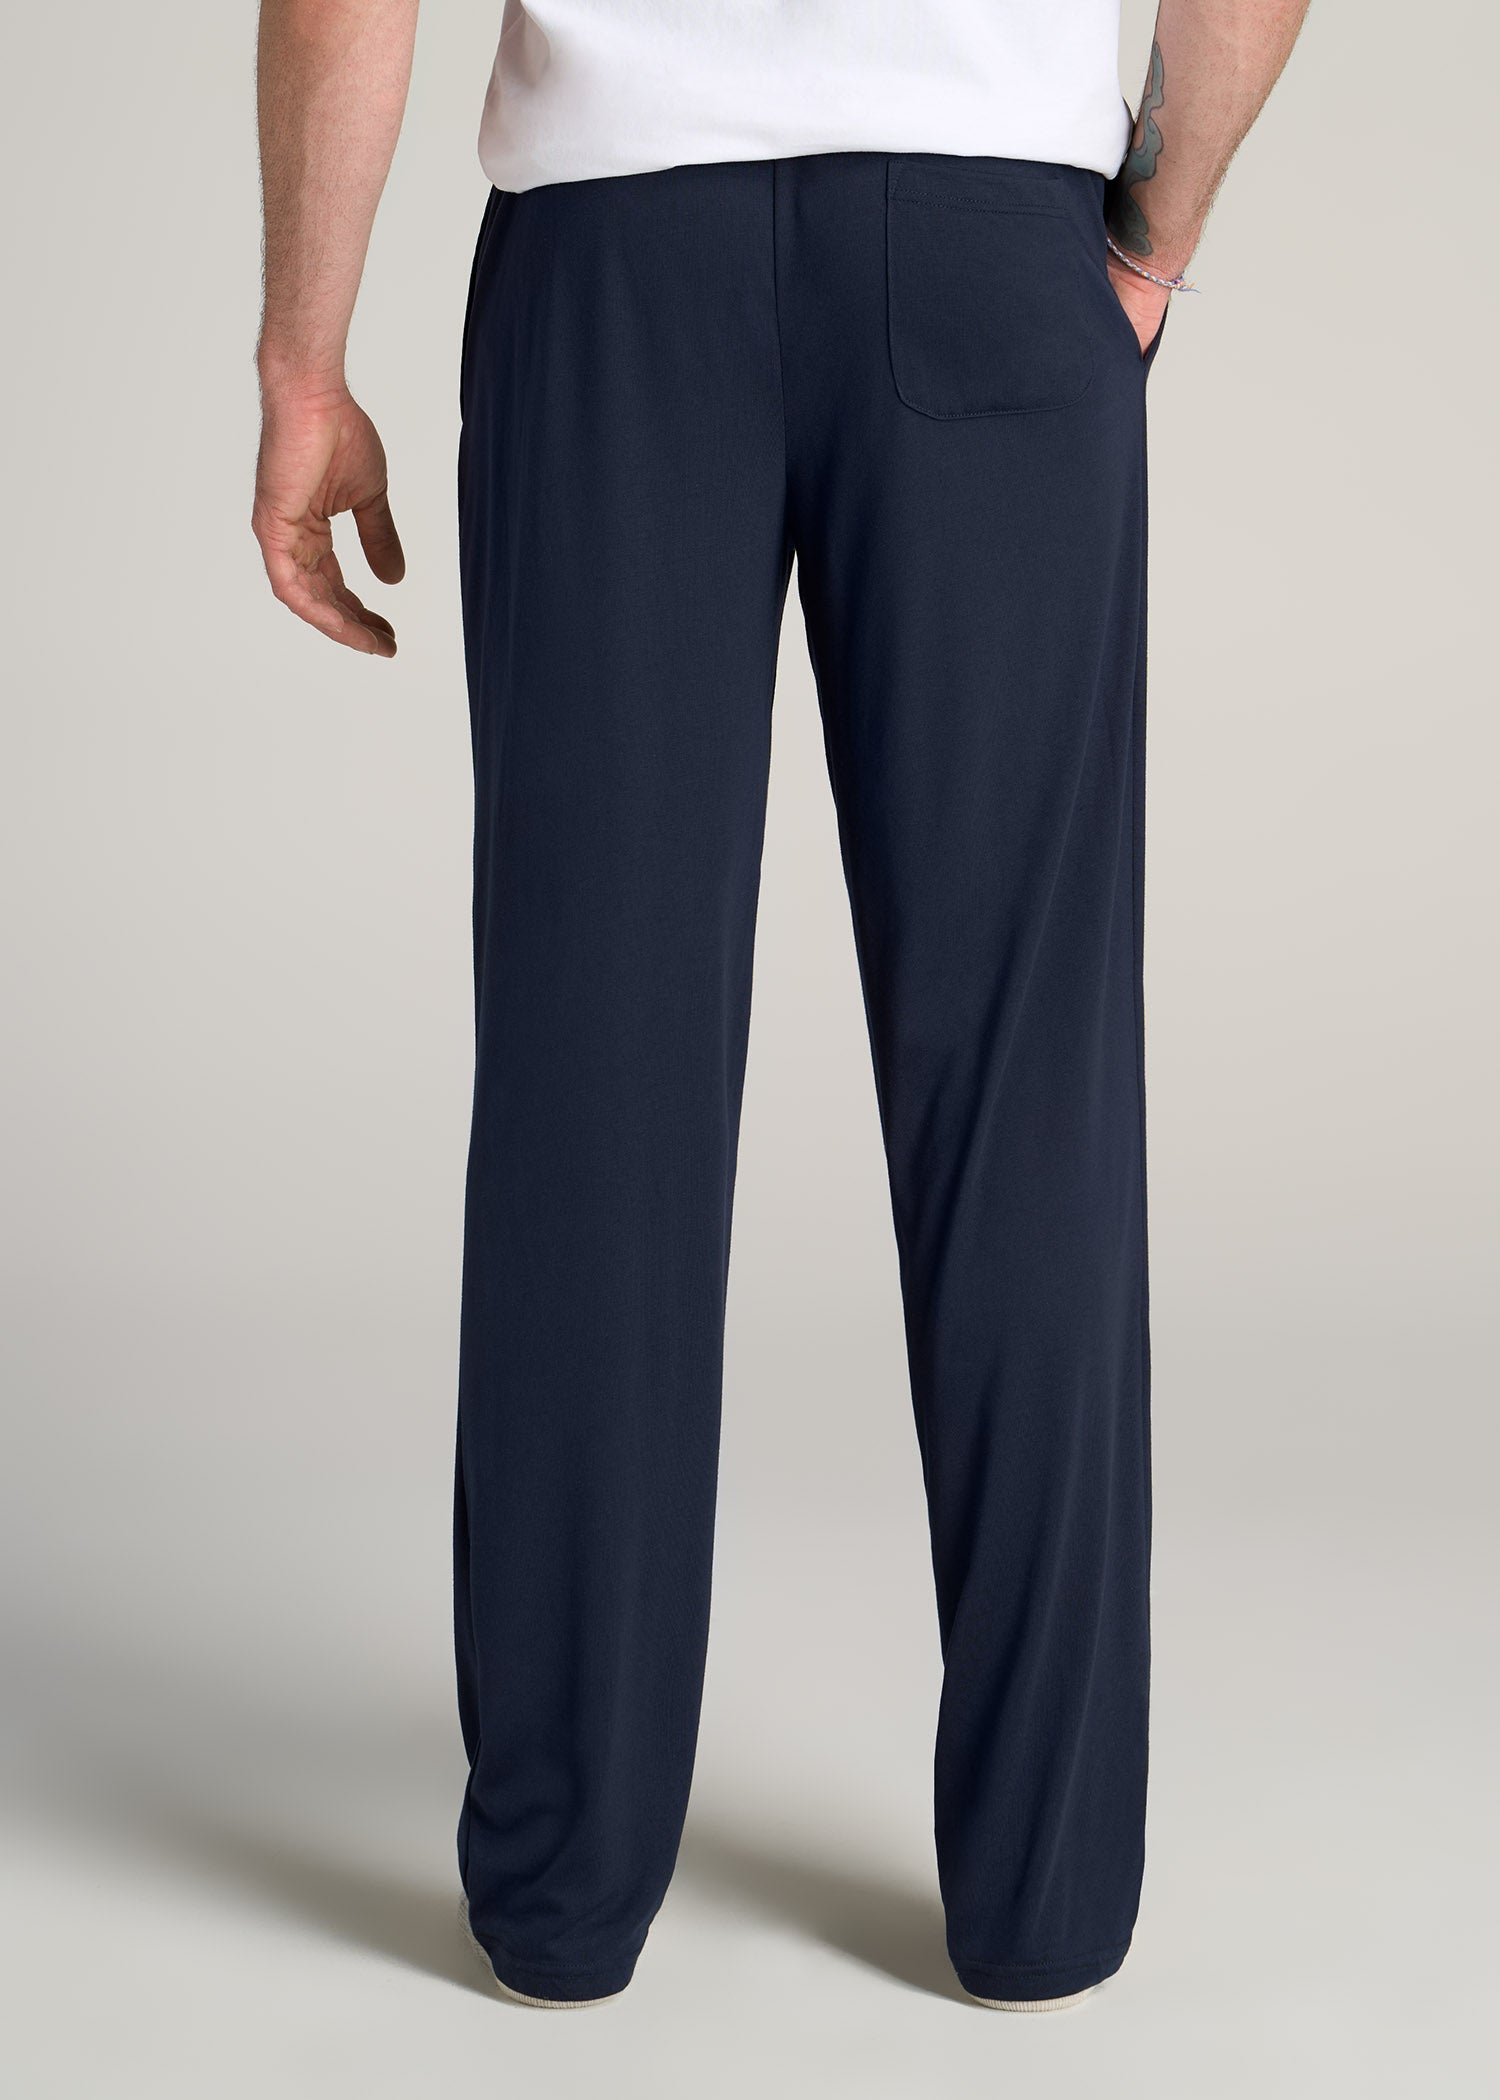 A New Day Pants 4 Navy Blue Women's Mid-Rise Slim Ankle Dress Pants